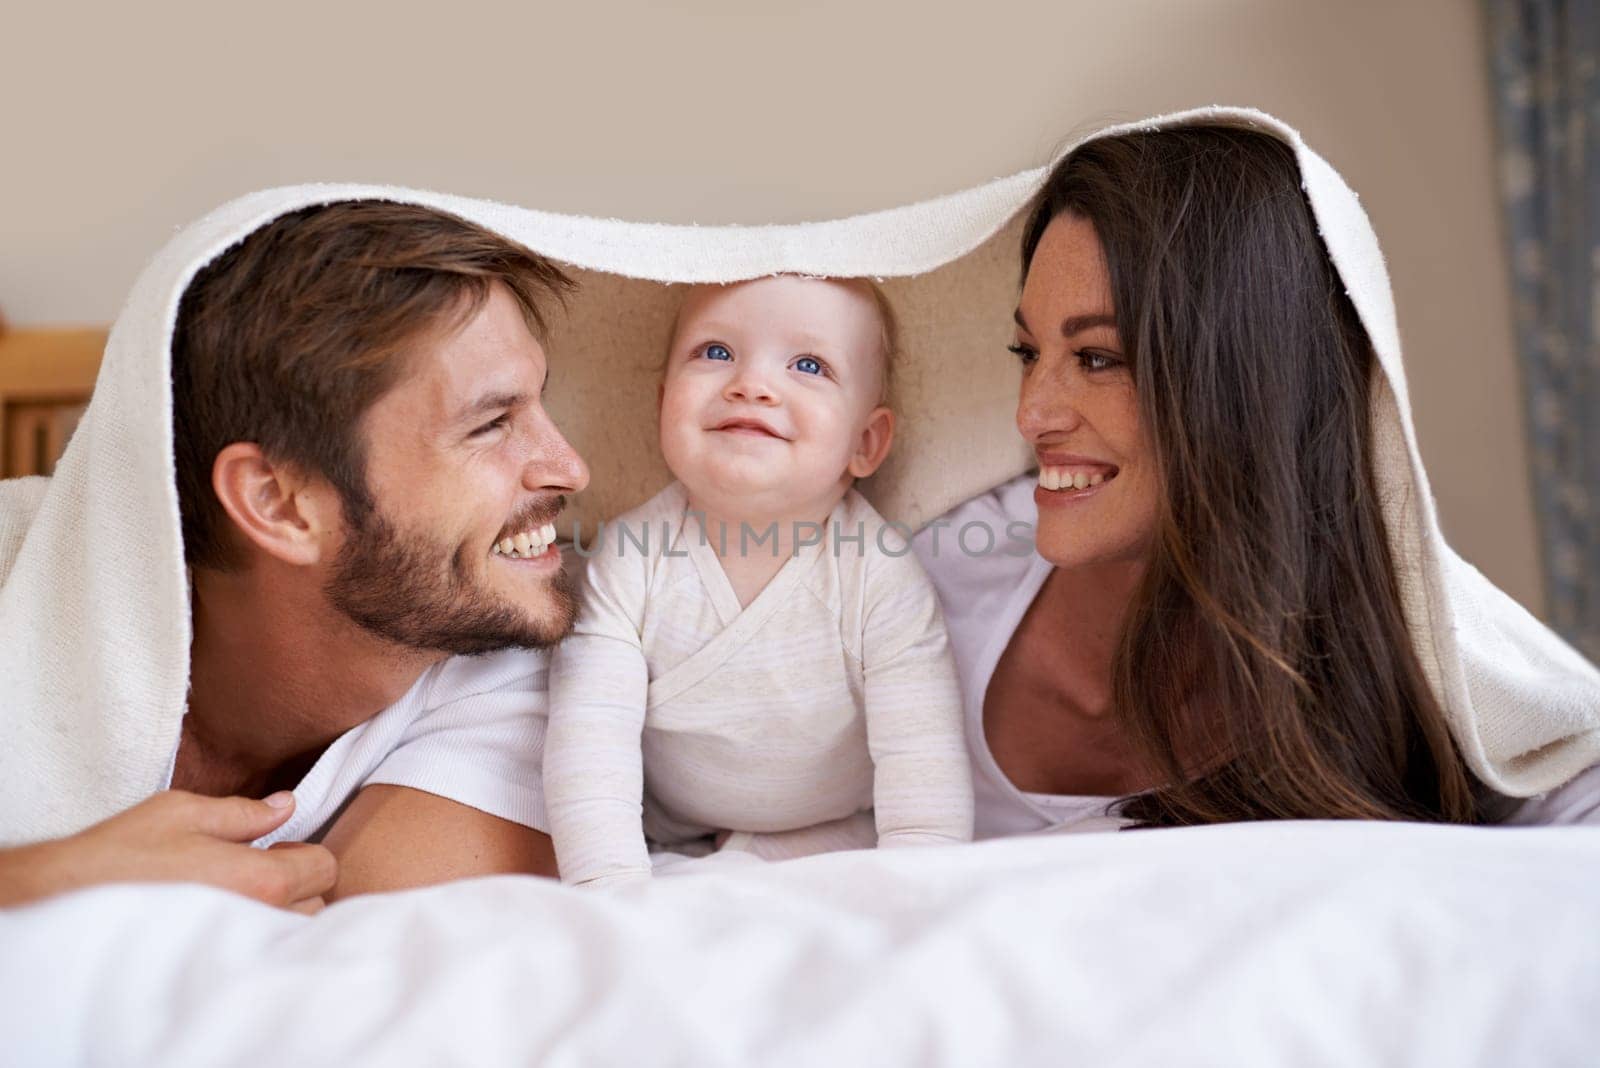 Happy family, parents and baby with blanket on bed for love, care and quality time together. Mother, father and playful newborn child relaxing in bedroom with bedding fort, smile and bonding at home by YuriArcurs